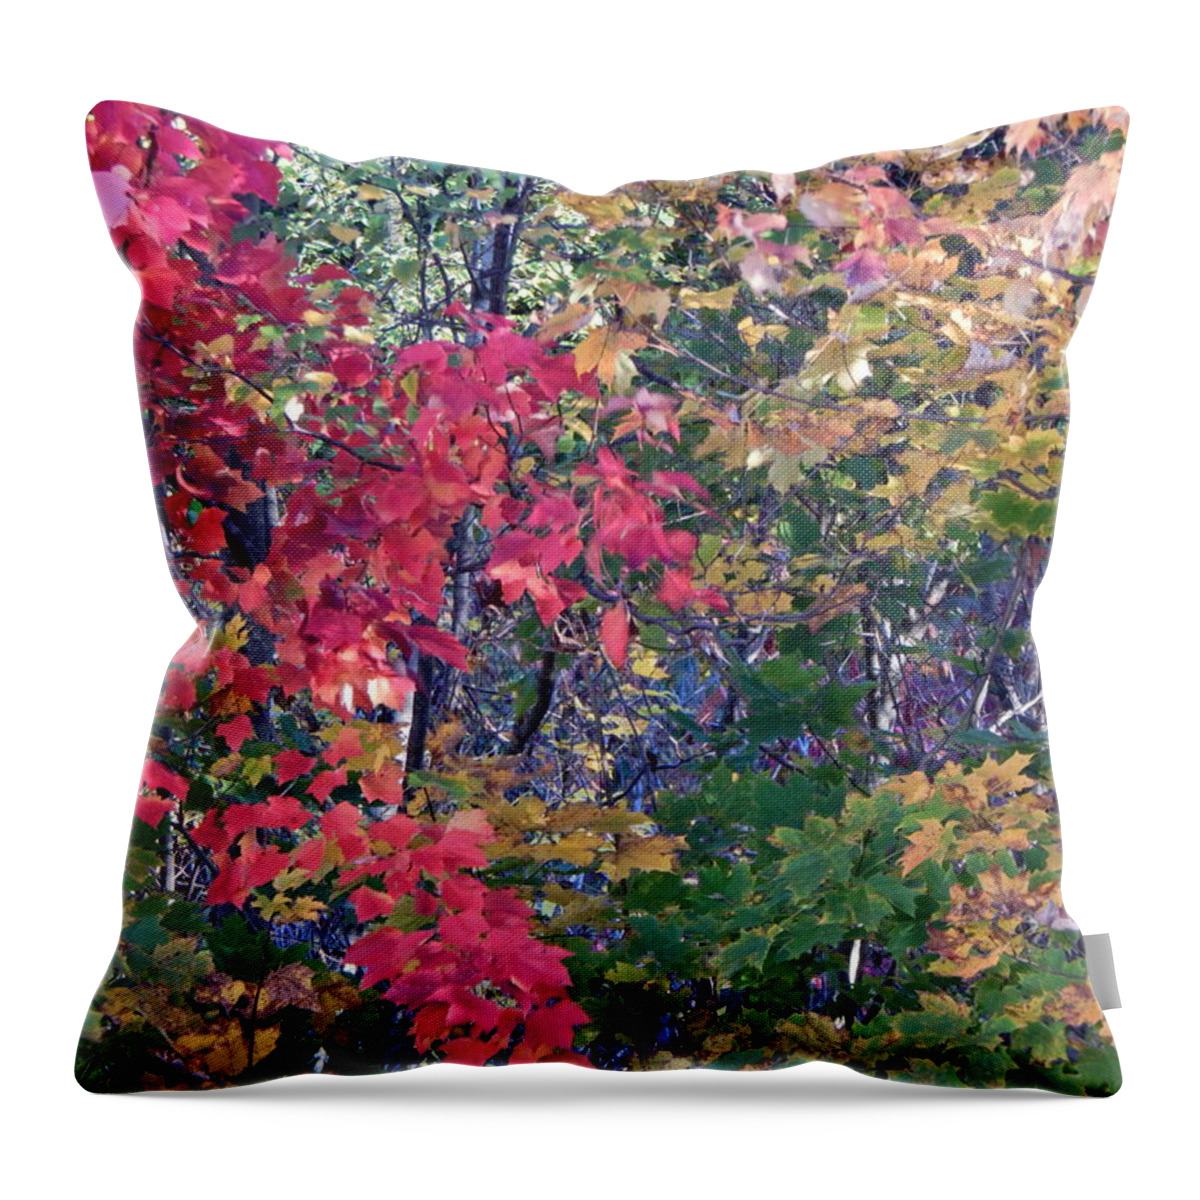 Landscape Throw Pillow featuring the photograph Fall 2016 3 by George Ramos